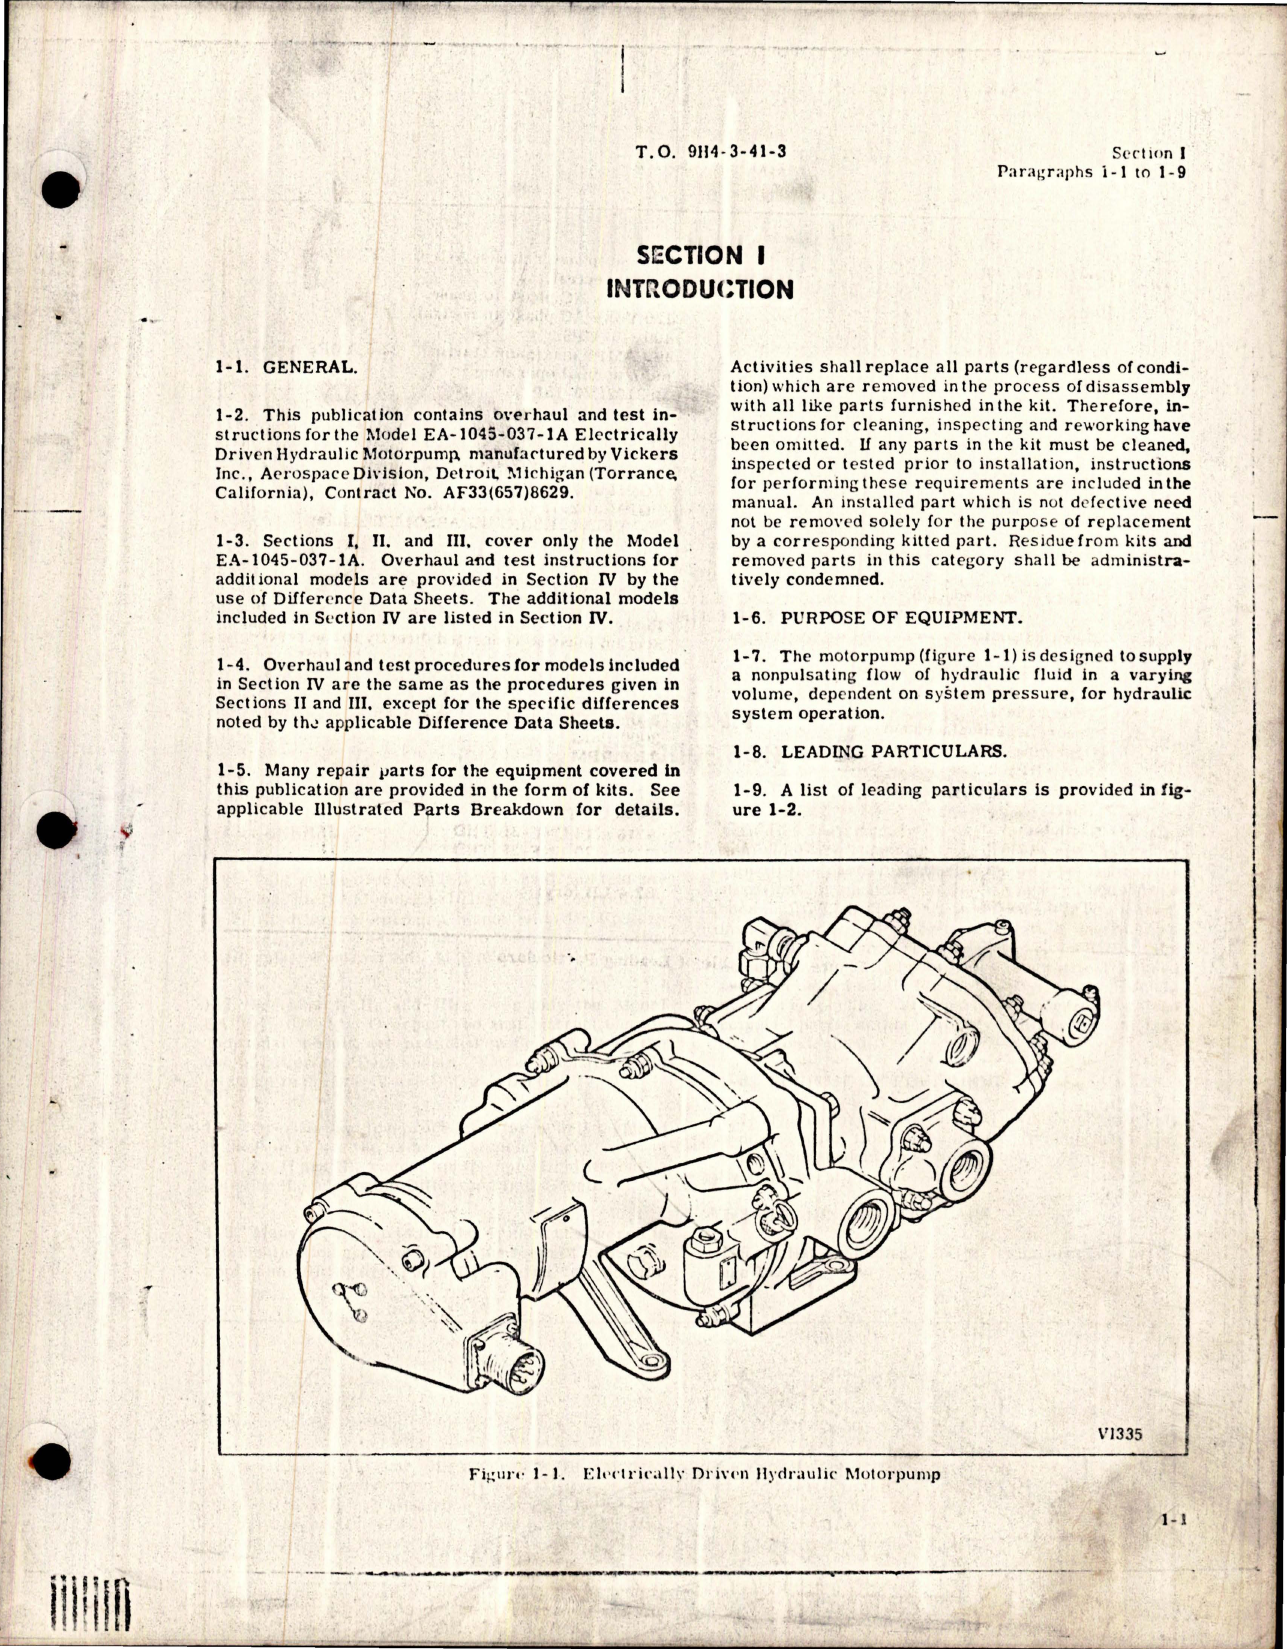 Sample page 5 from AirCorps Library document: Overhaul Instructions for Electrically Driven Hydraulic Motorpump - Change No. 3 